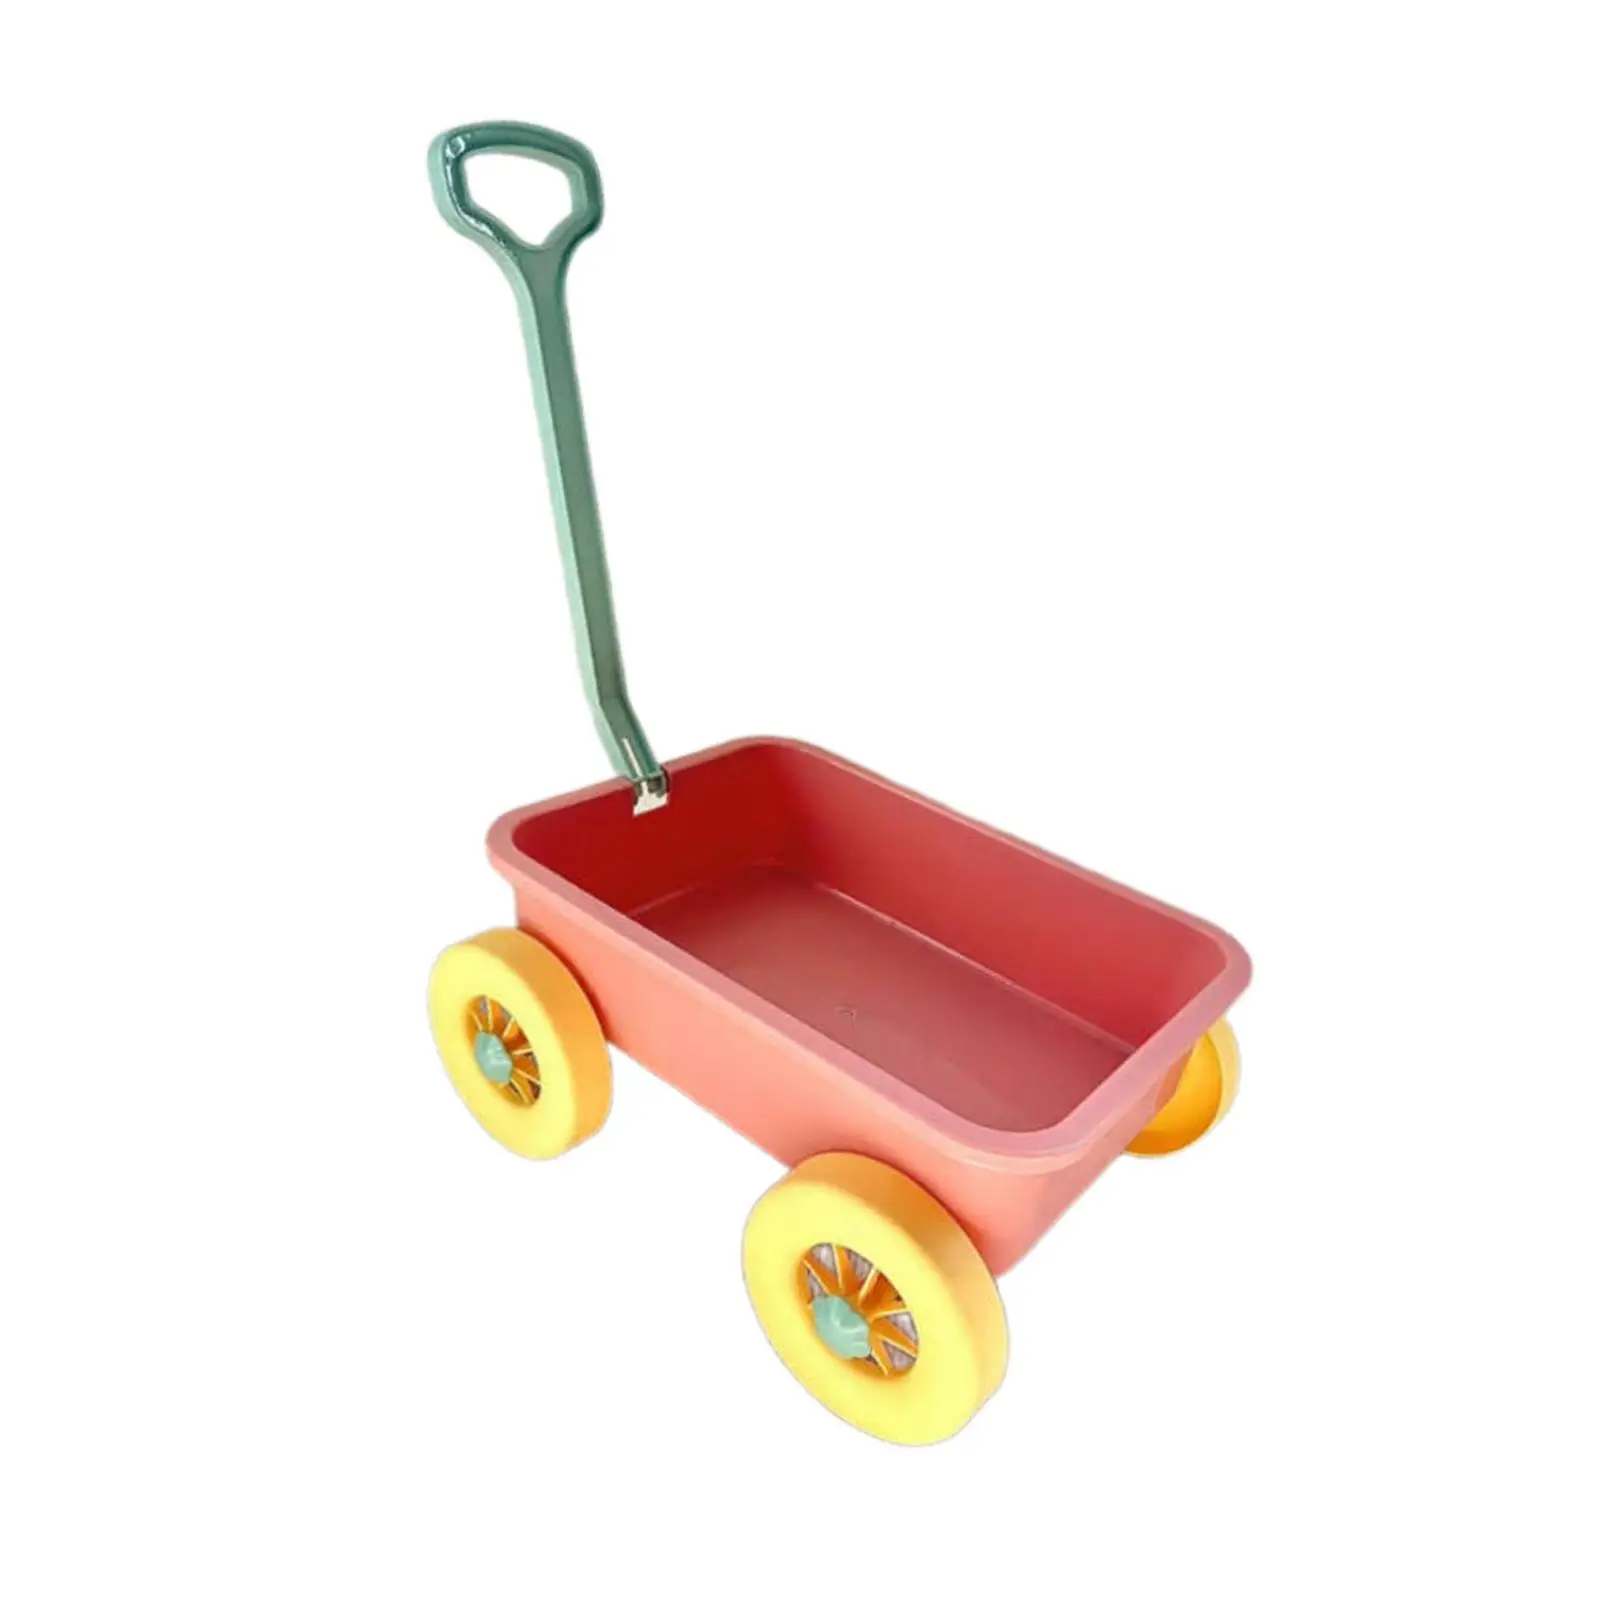 Beach Toy Cart Small Wagon Toy Portable Sand Toy Multipurpose Pretend Play Wagon for Household Yard Seaside Gardening Children